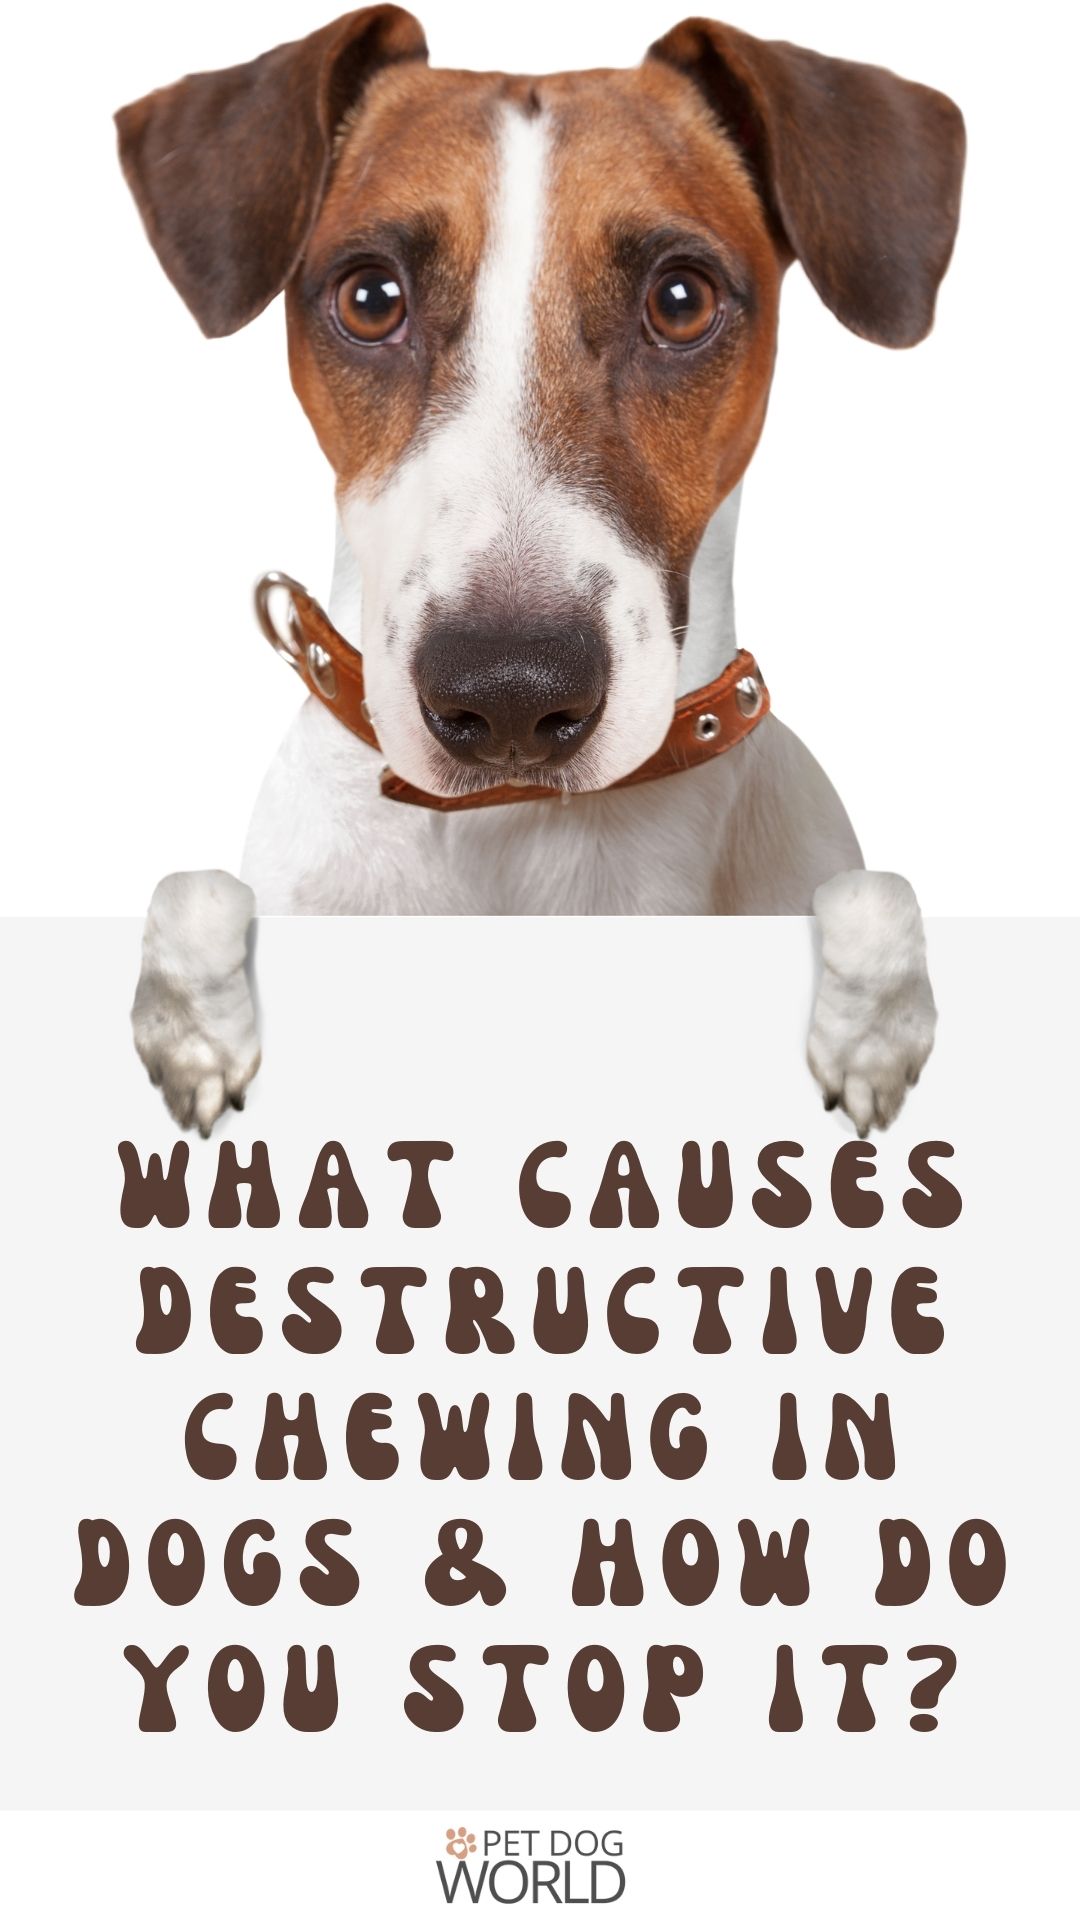 Destructive chewing in dogs often leads to extensive destruction of personal property when not corrected. Here's how to stop it.